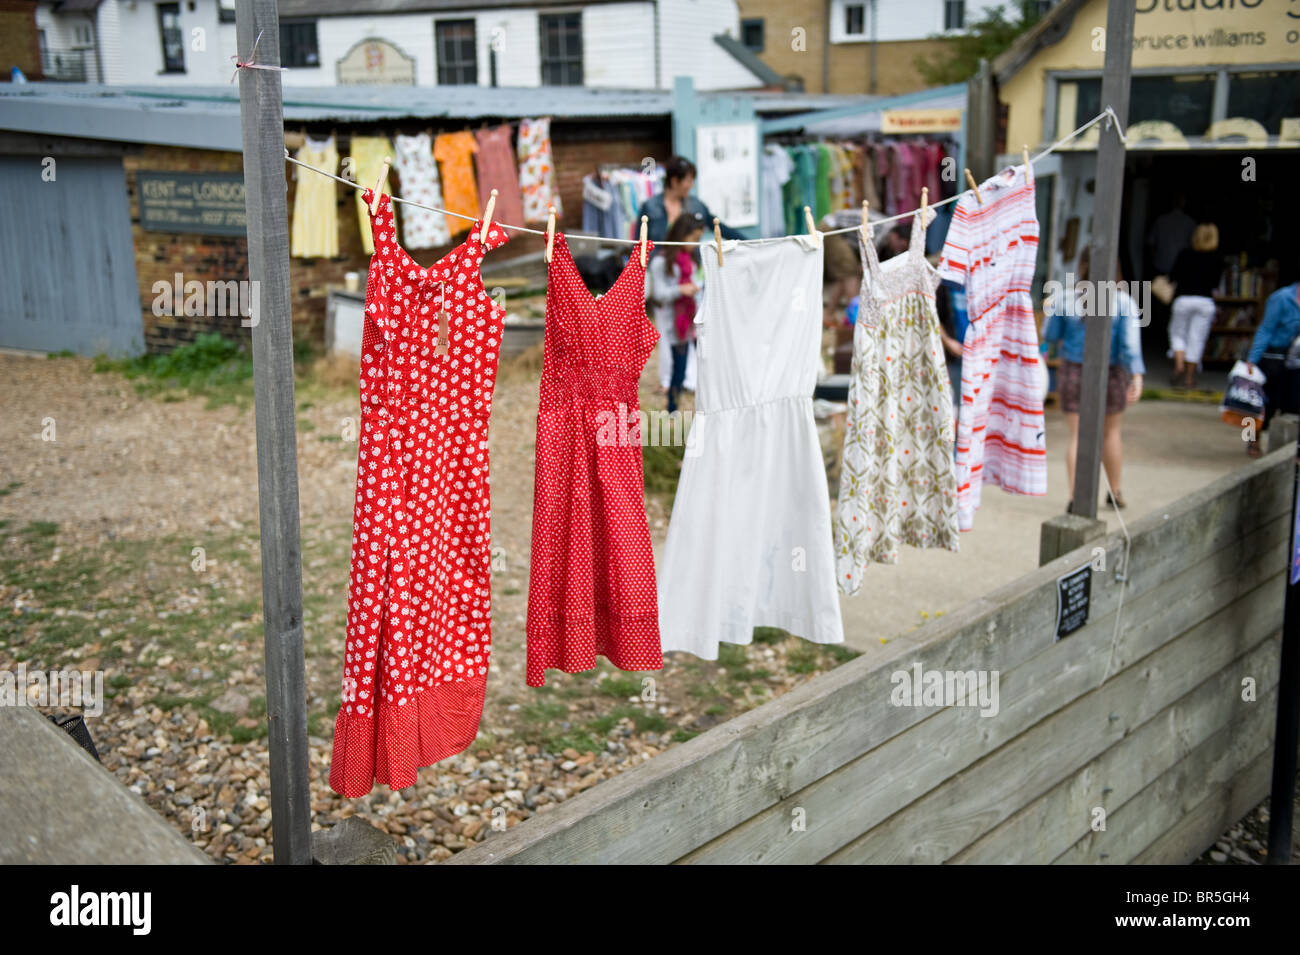 A washing line displaying second hand vintage dresses for sale Stock Photo  - Alamy